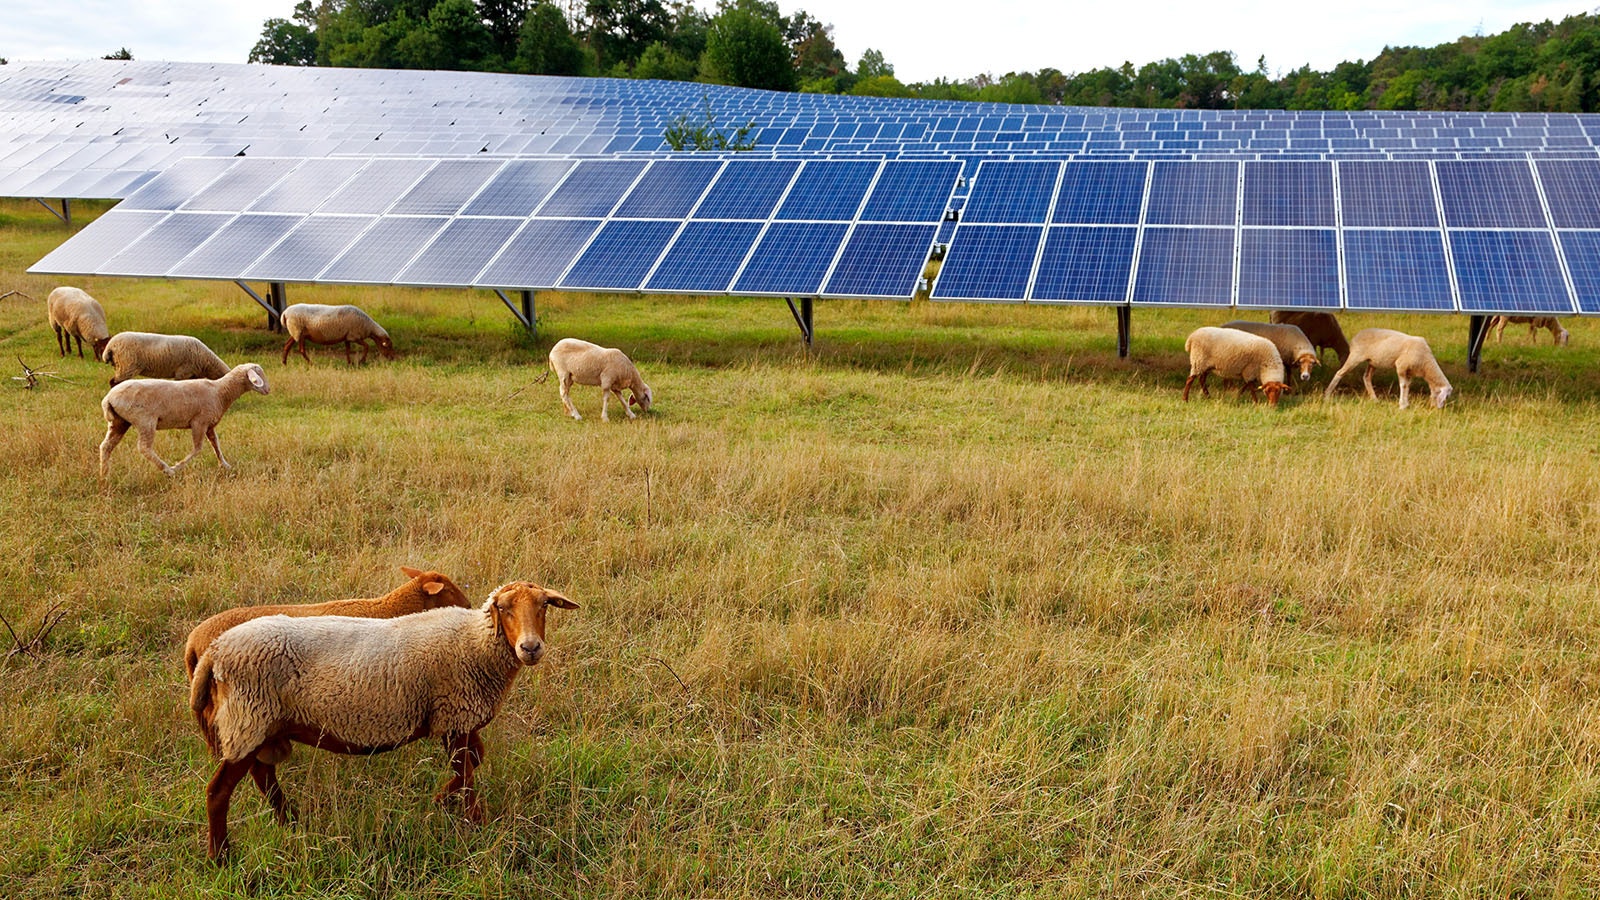 Sheep graze around and under a field of solar panels.